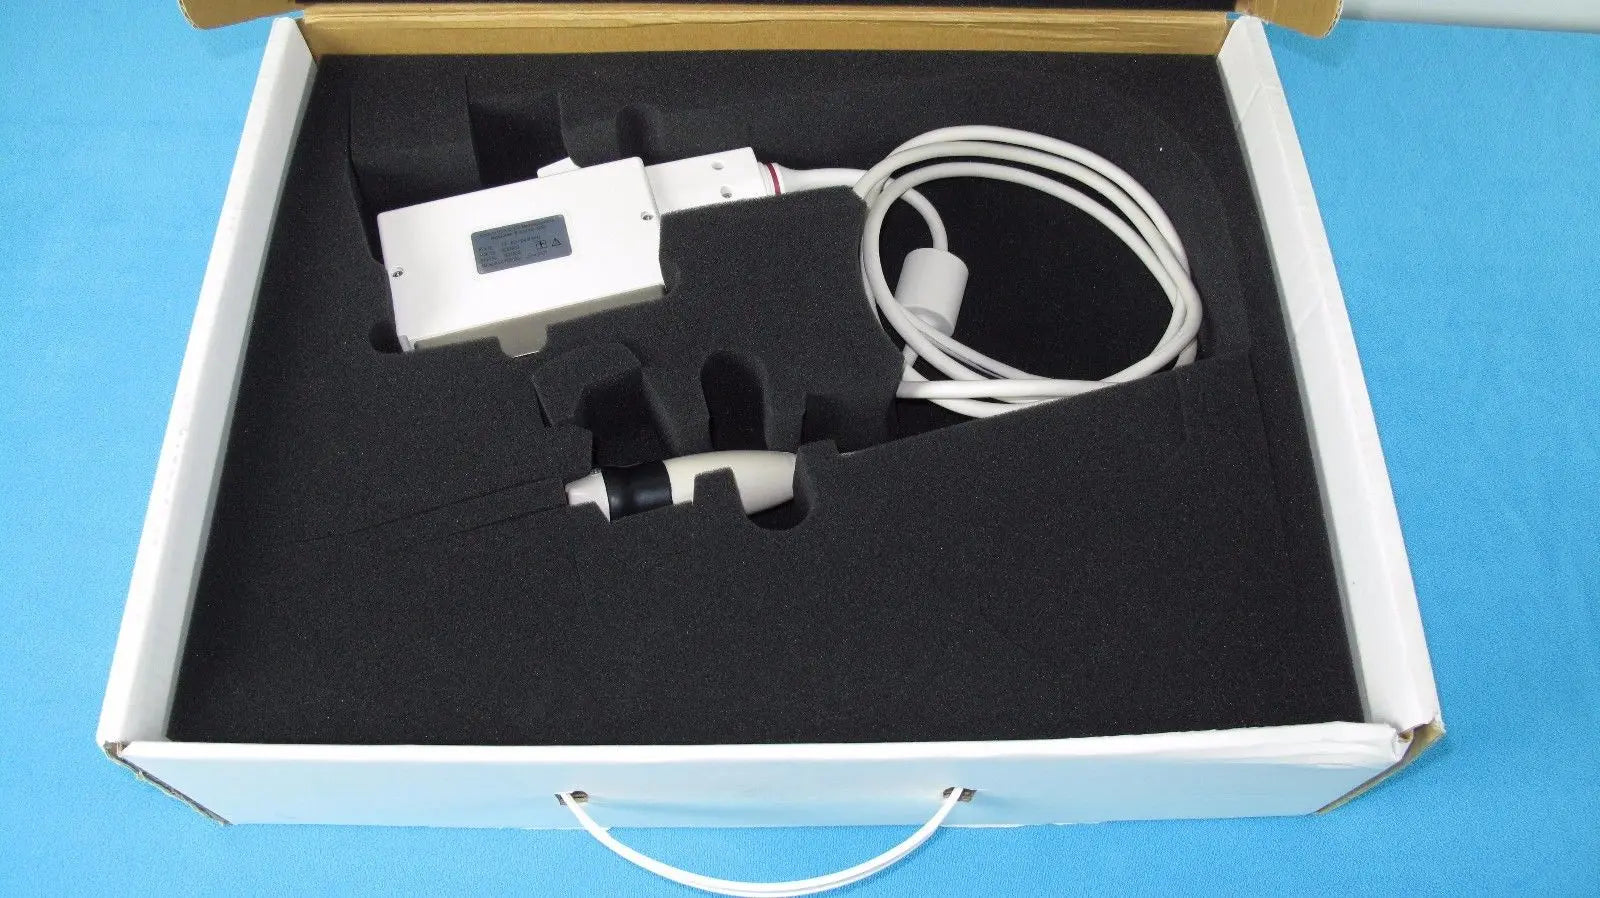 GE 7S Model 2251903 Ultrasound Transducer (Probe) 4 MHz With Case (Excellent) DIAGNOSTIC ULTRASOUND MACHINES FOR SALE